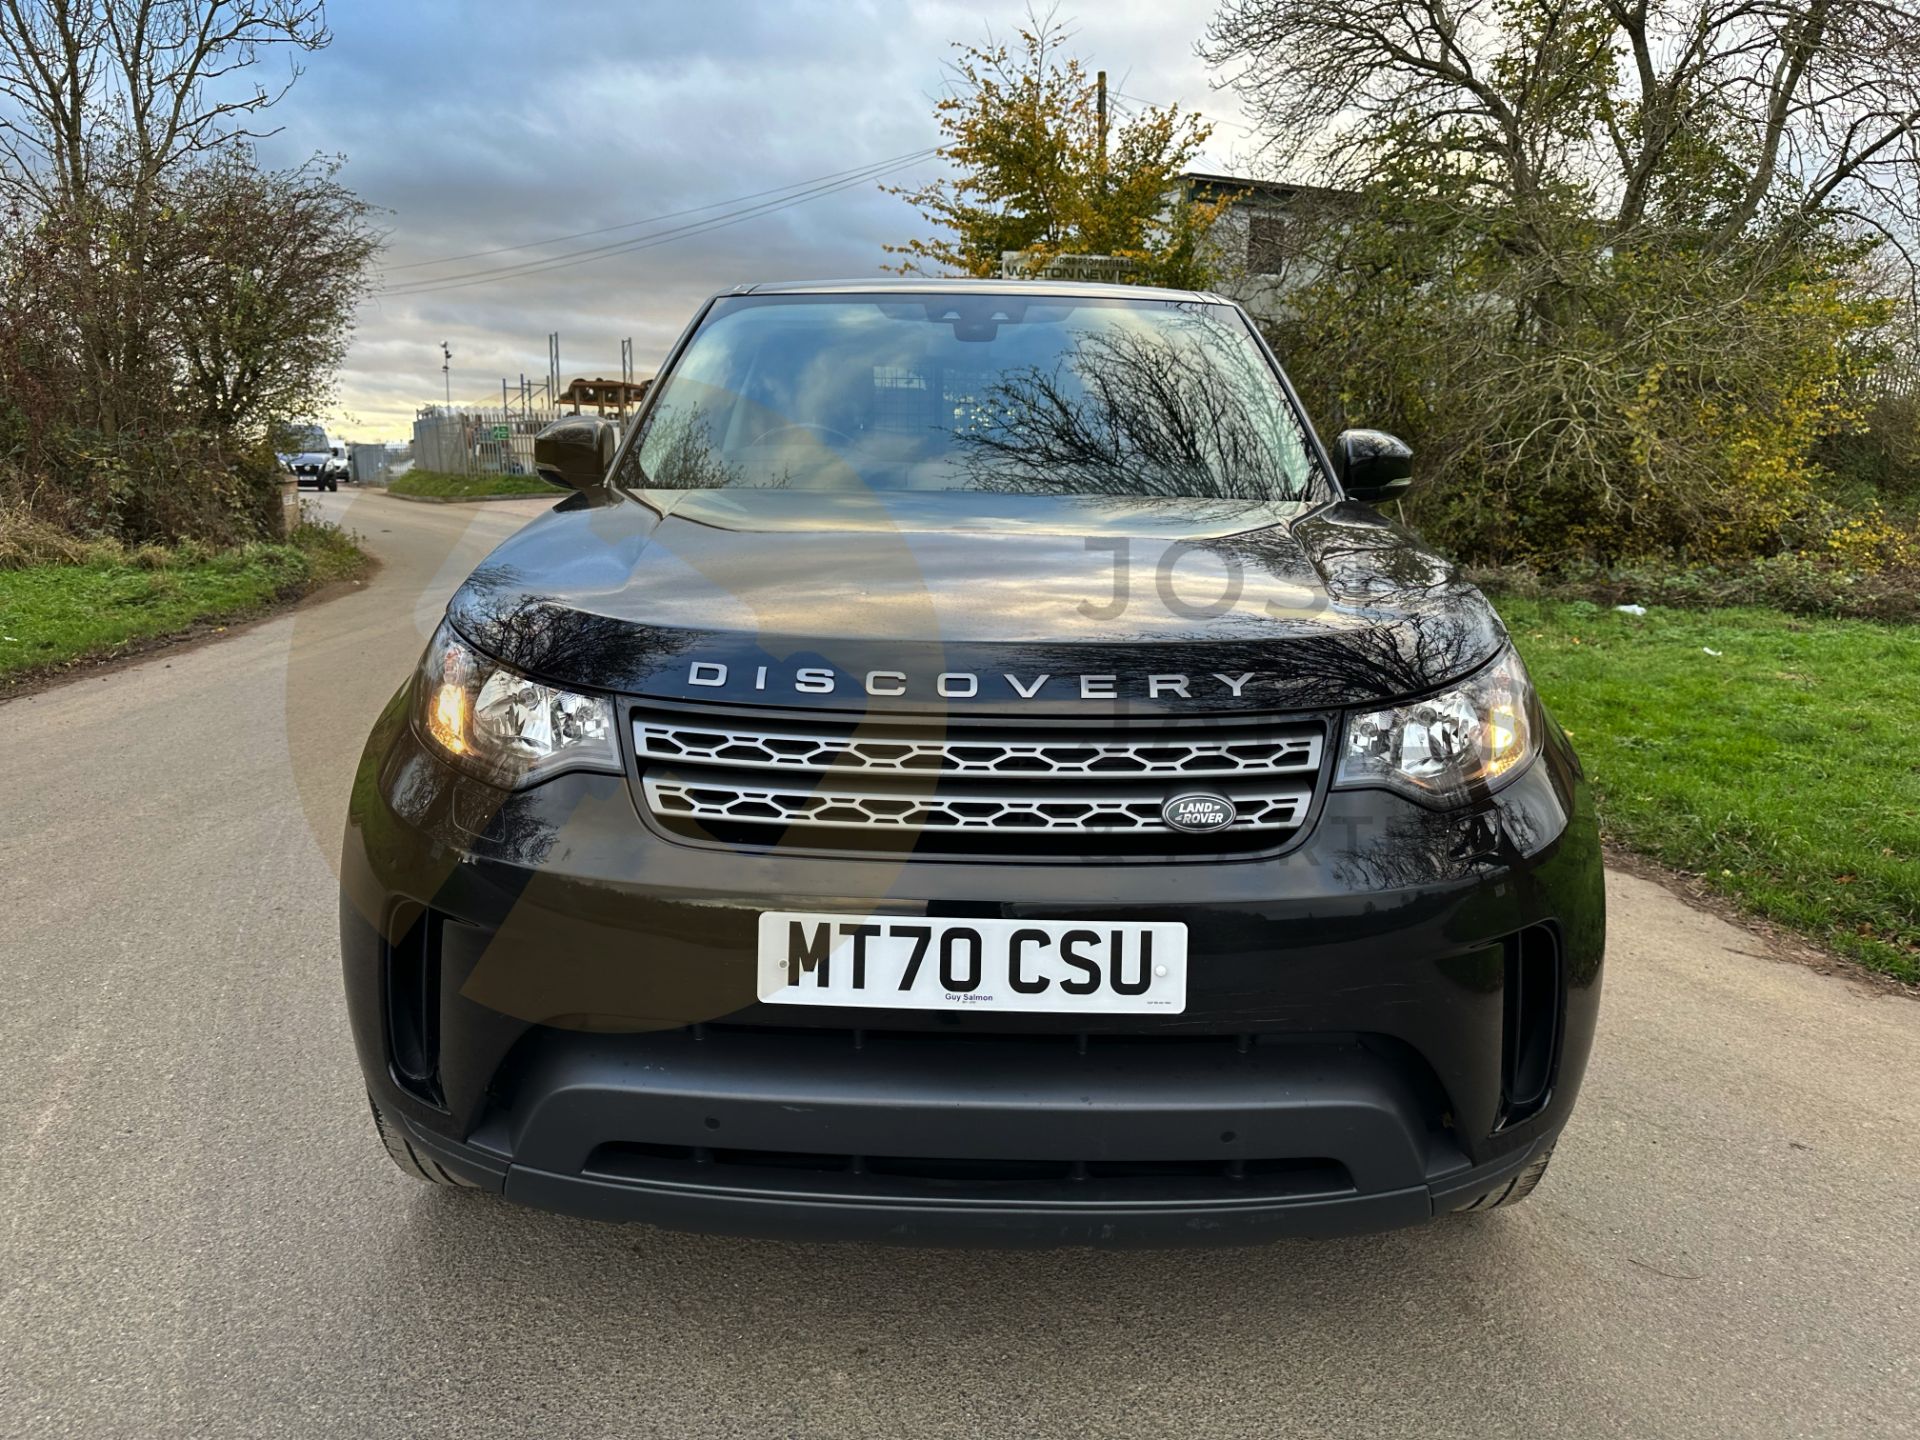 LAND ROVER DISCOVERY 5 *ALL NEW MODEL* (2021 - EURO 6) 8 SPEED AUTO (1 OWNER) *ONLY 19,000 MILES* - Image 4 of 50